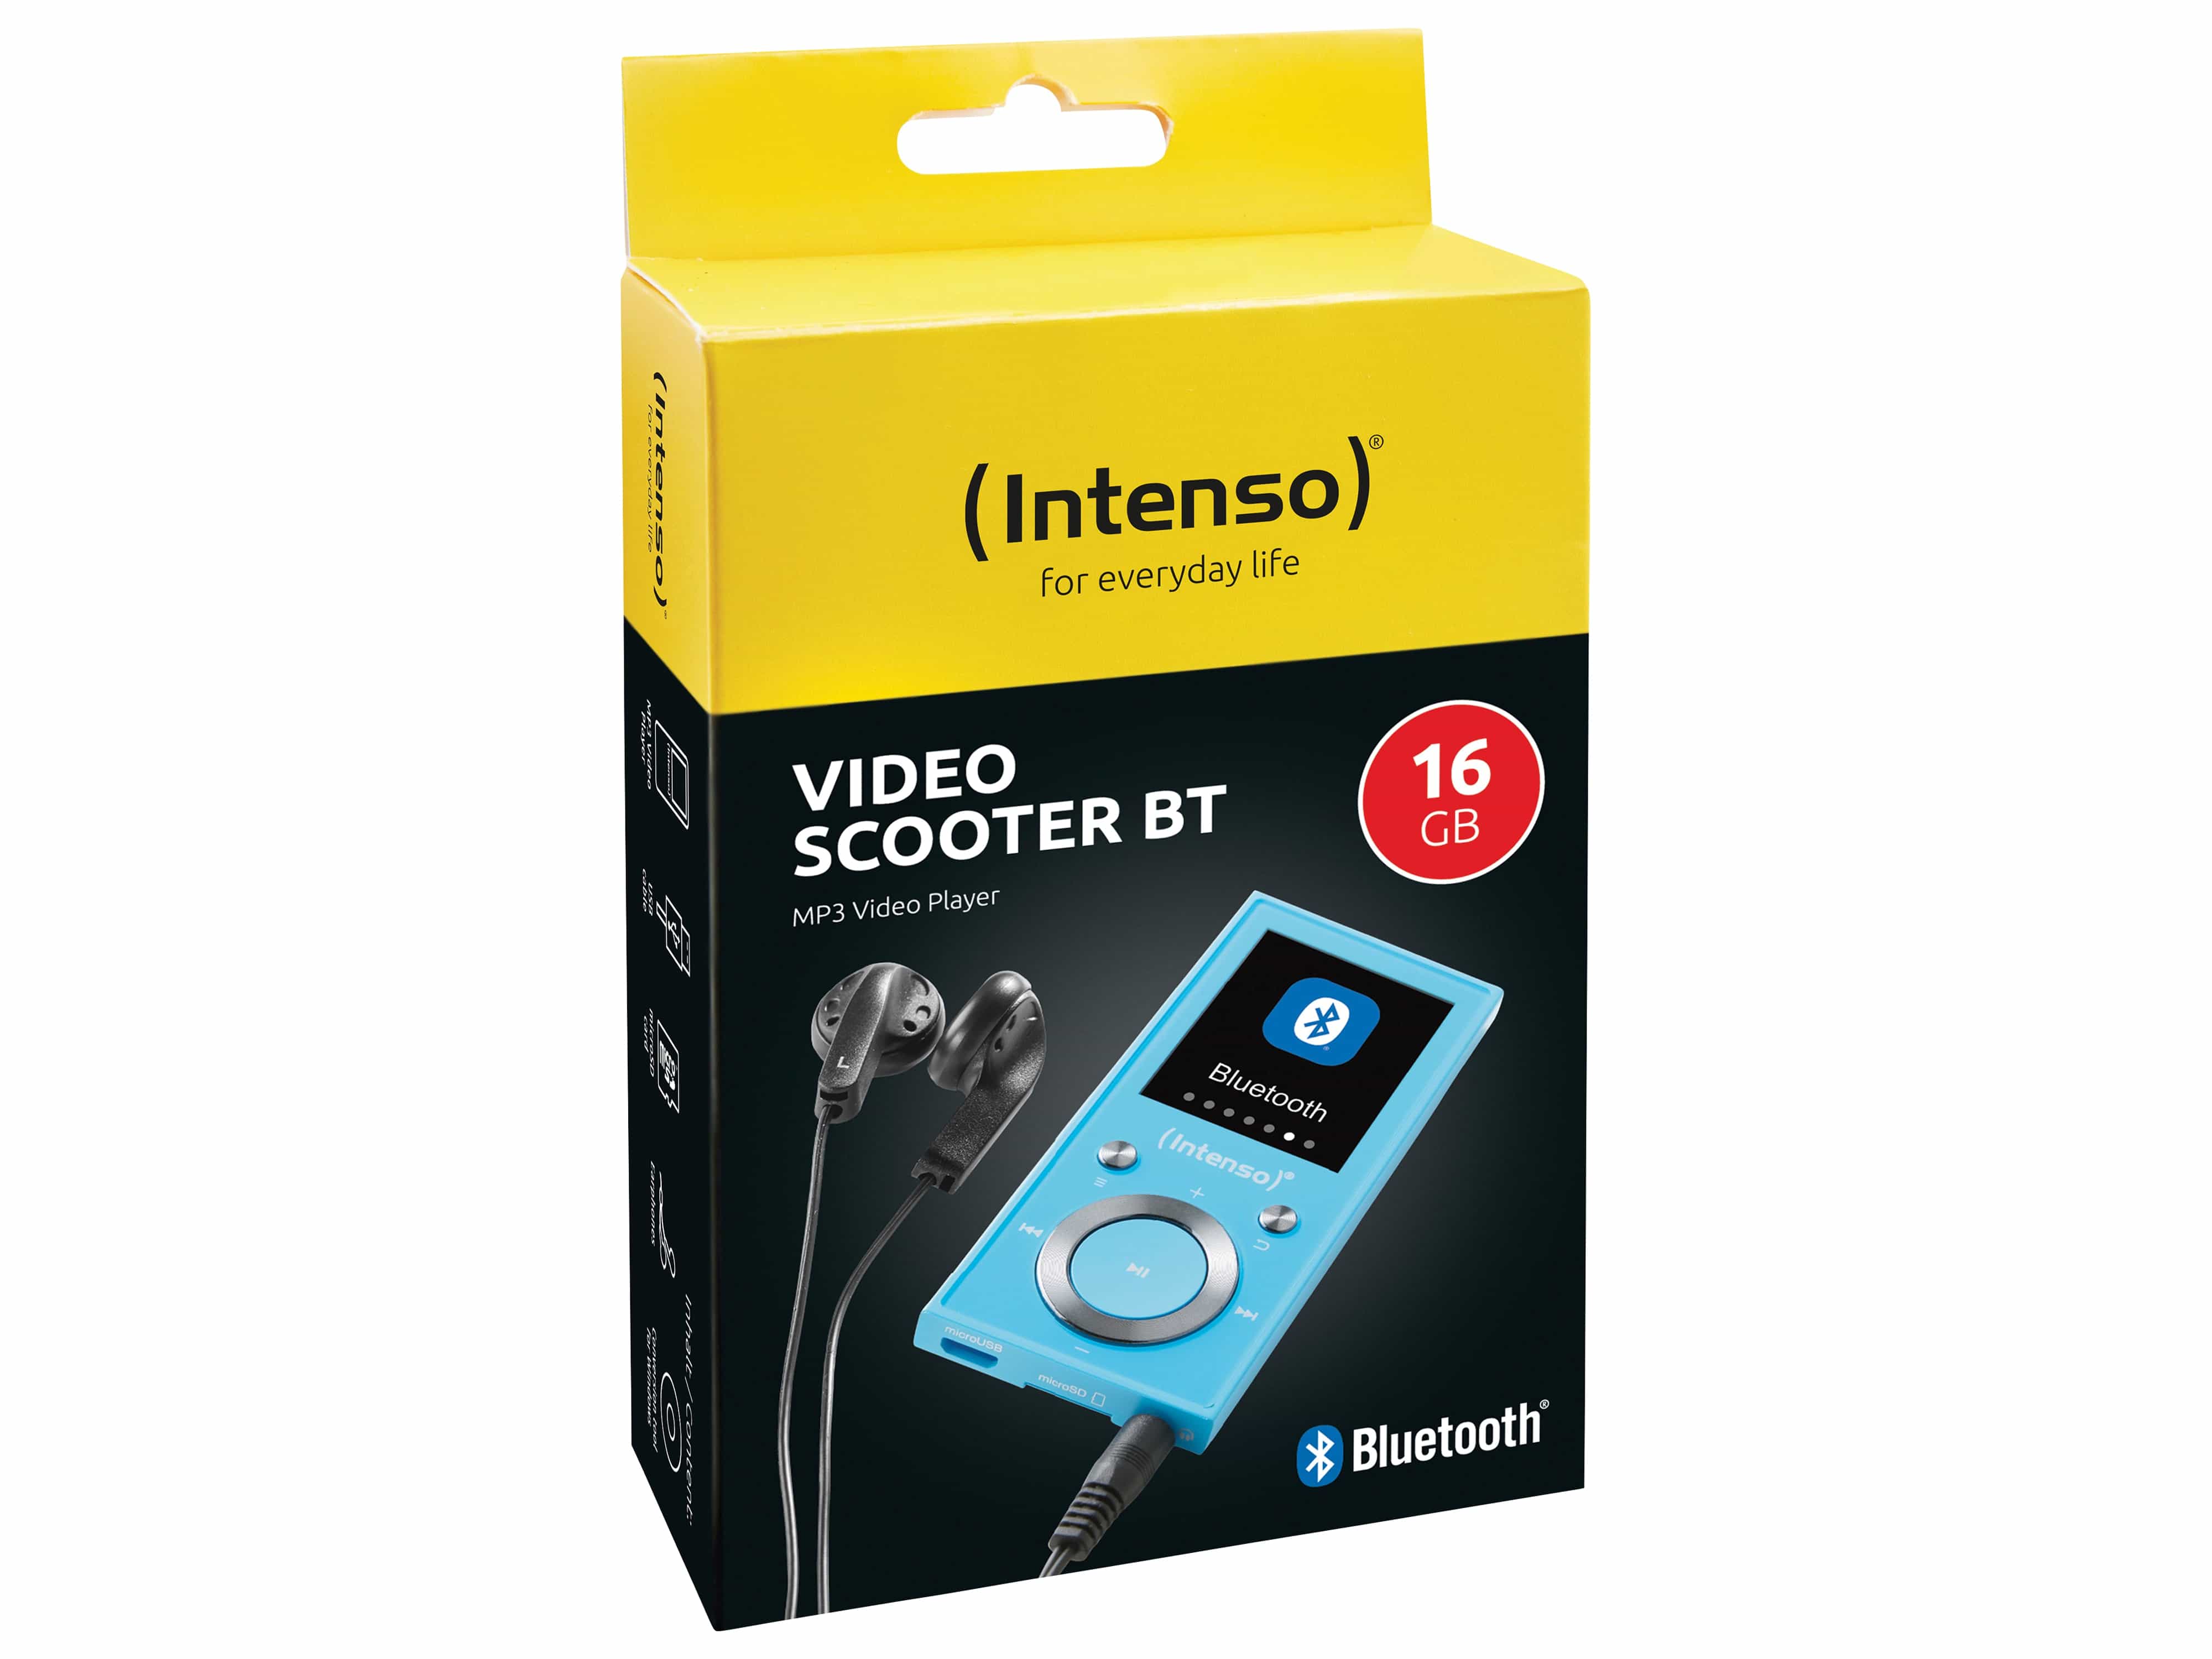 INTENSO MP3-Videoplayer 3717474 Video Scooter BT, 16 GB, blau